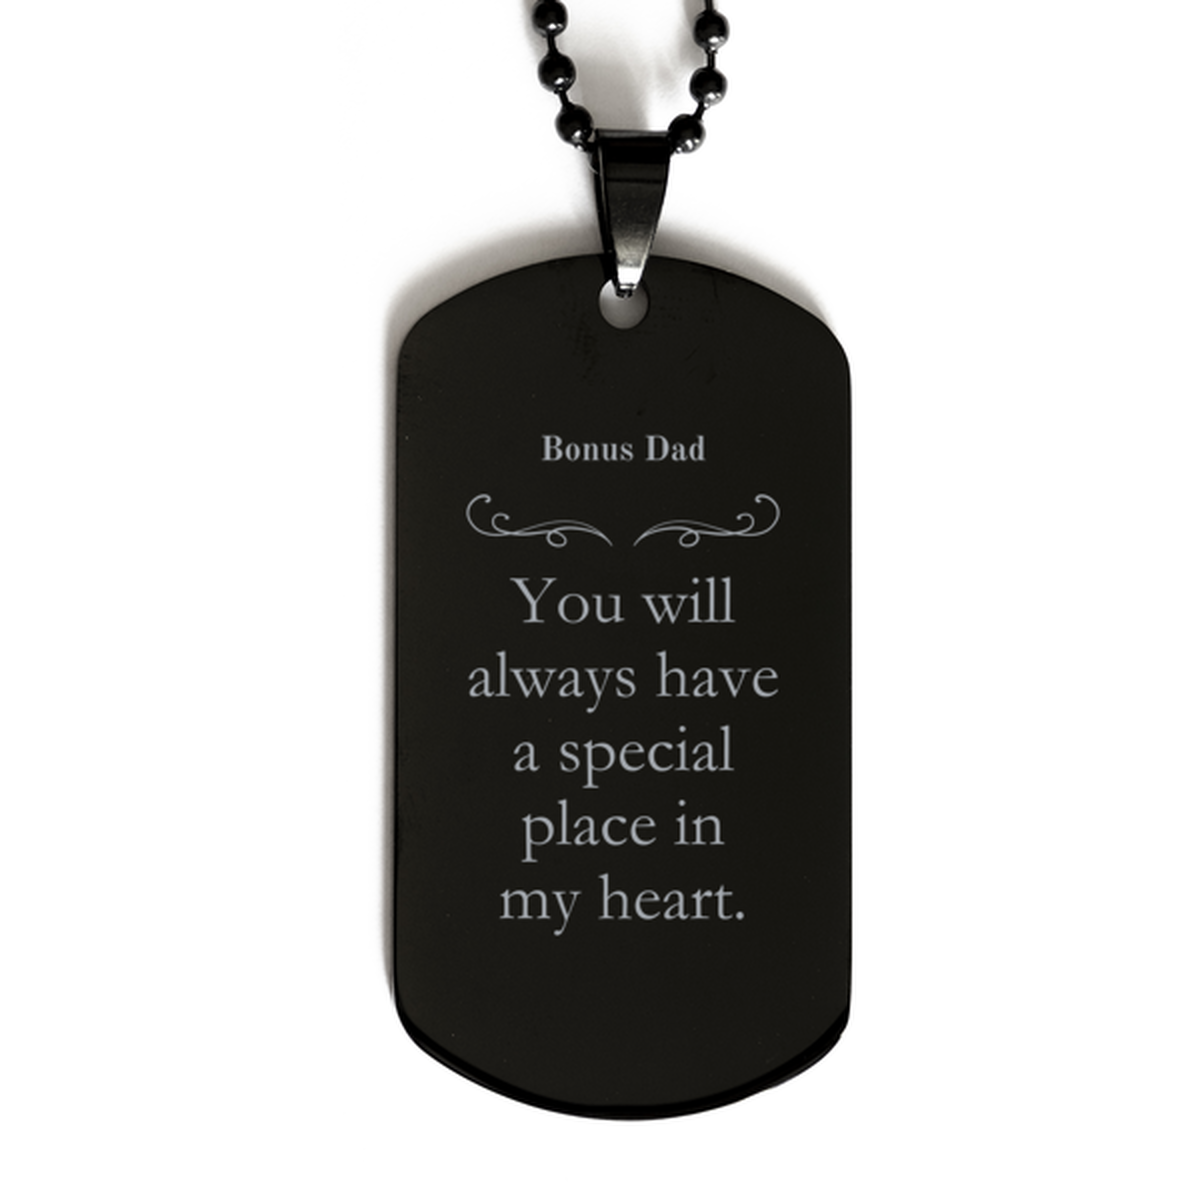 Bonus Dad Black Dog Tag You will always have a special place in my heart engraved meaningful gift for Birthday Veterans Day Christmas